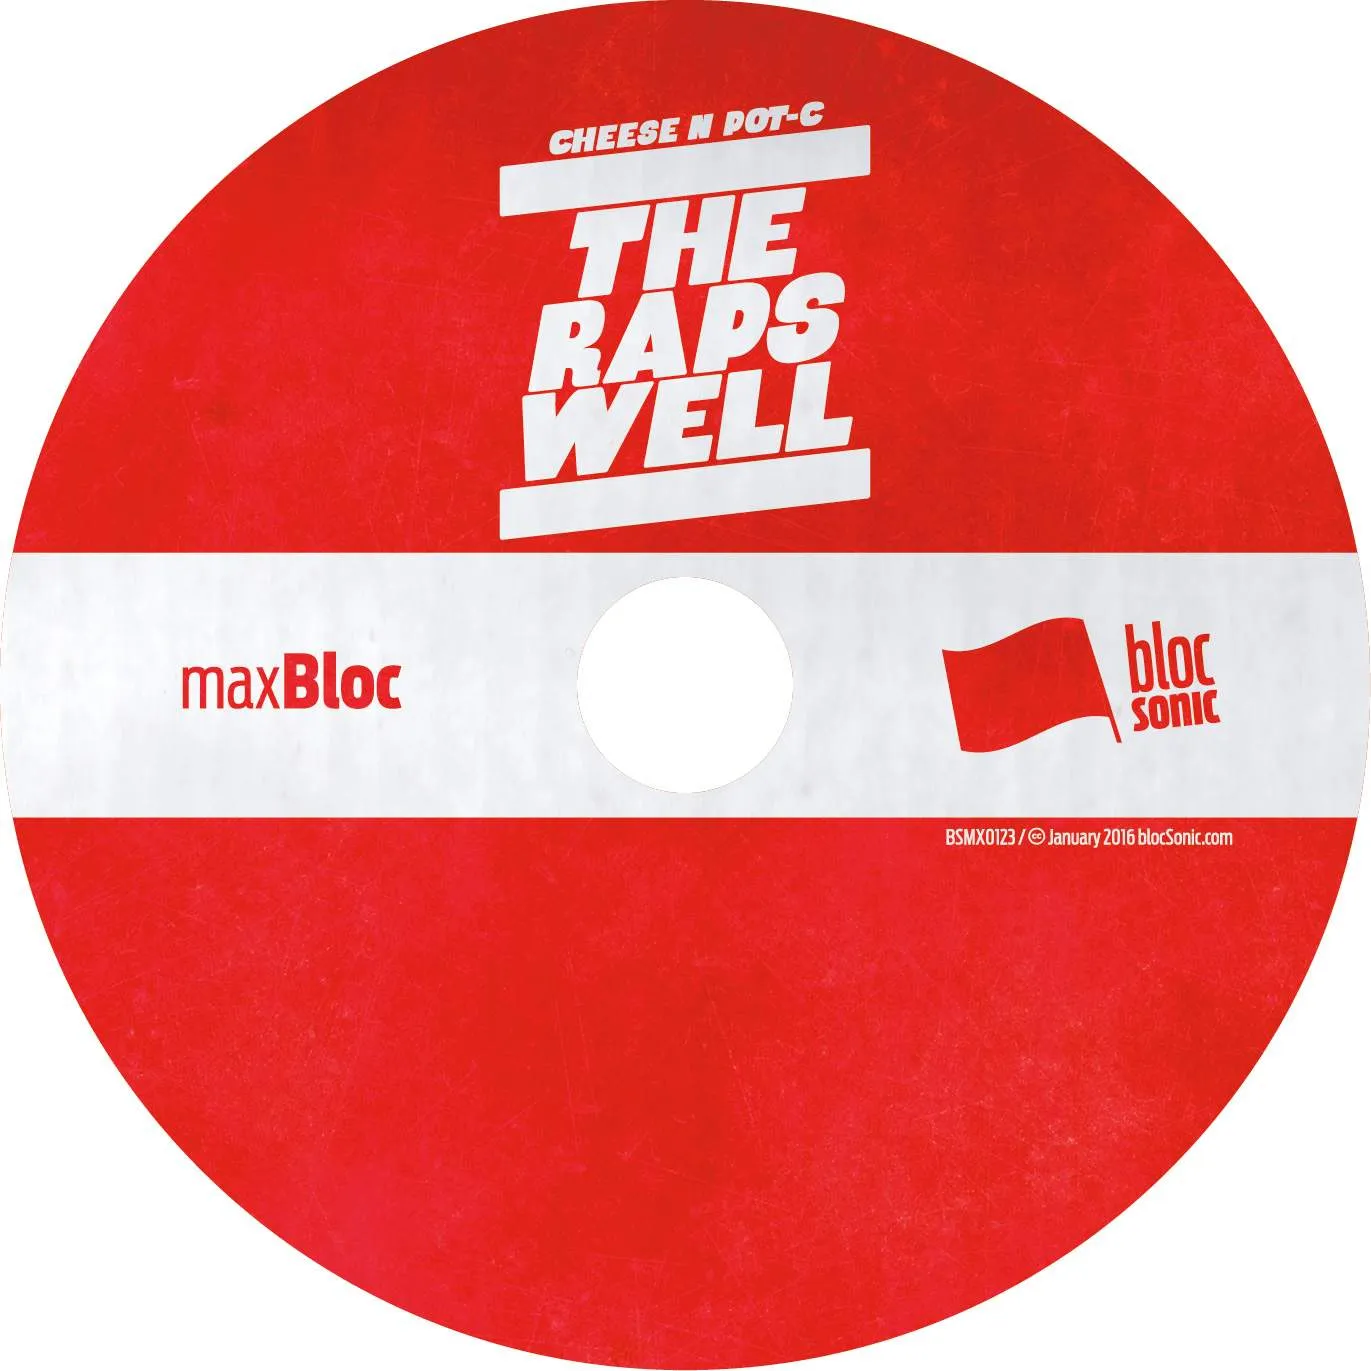 Album disc for “The Raps Well” by Cheese N Pot-C